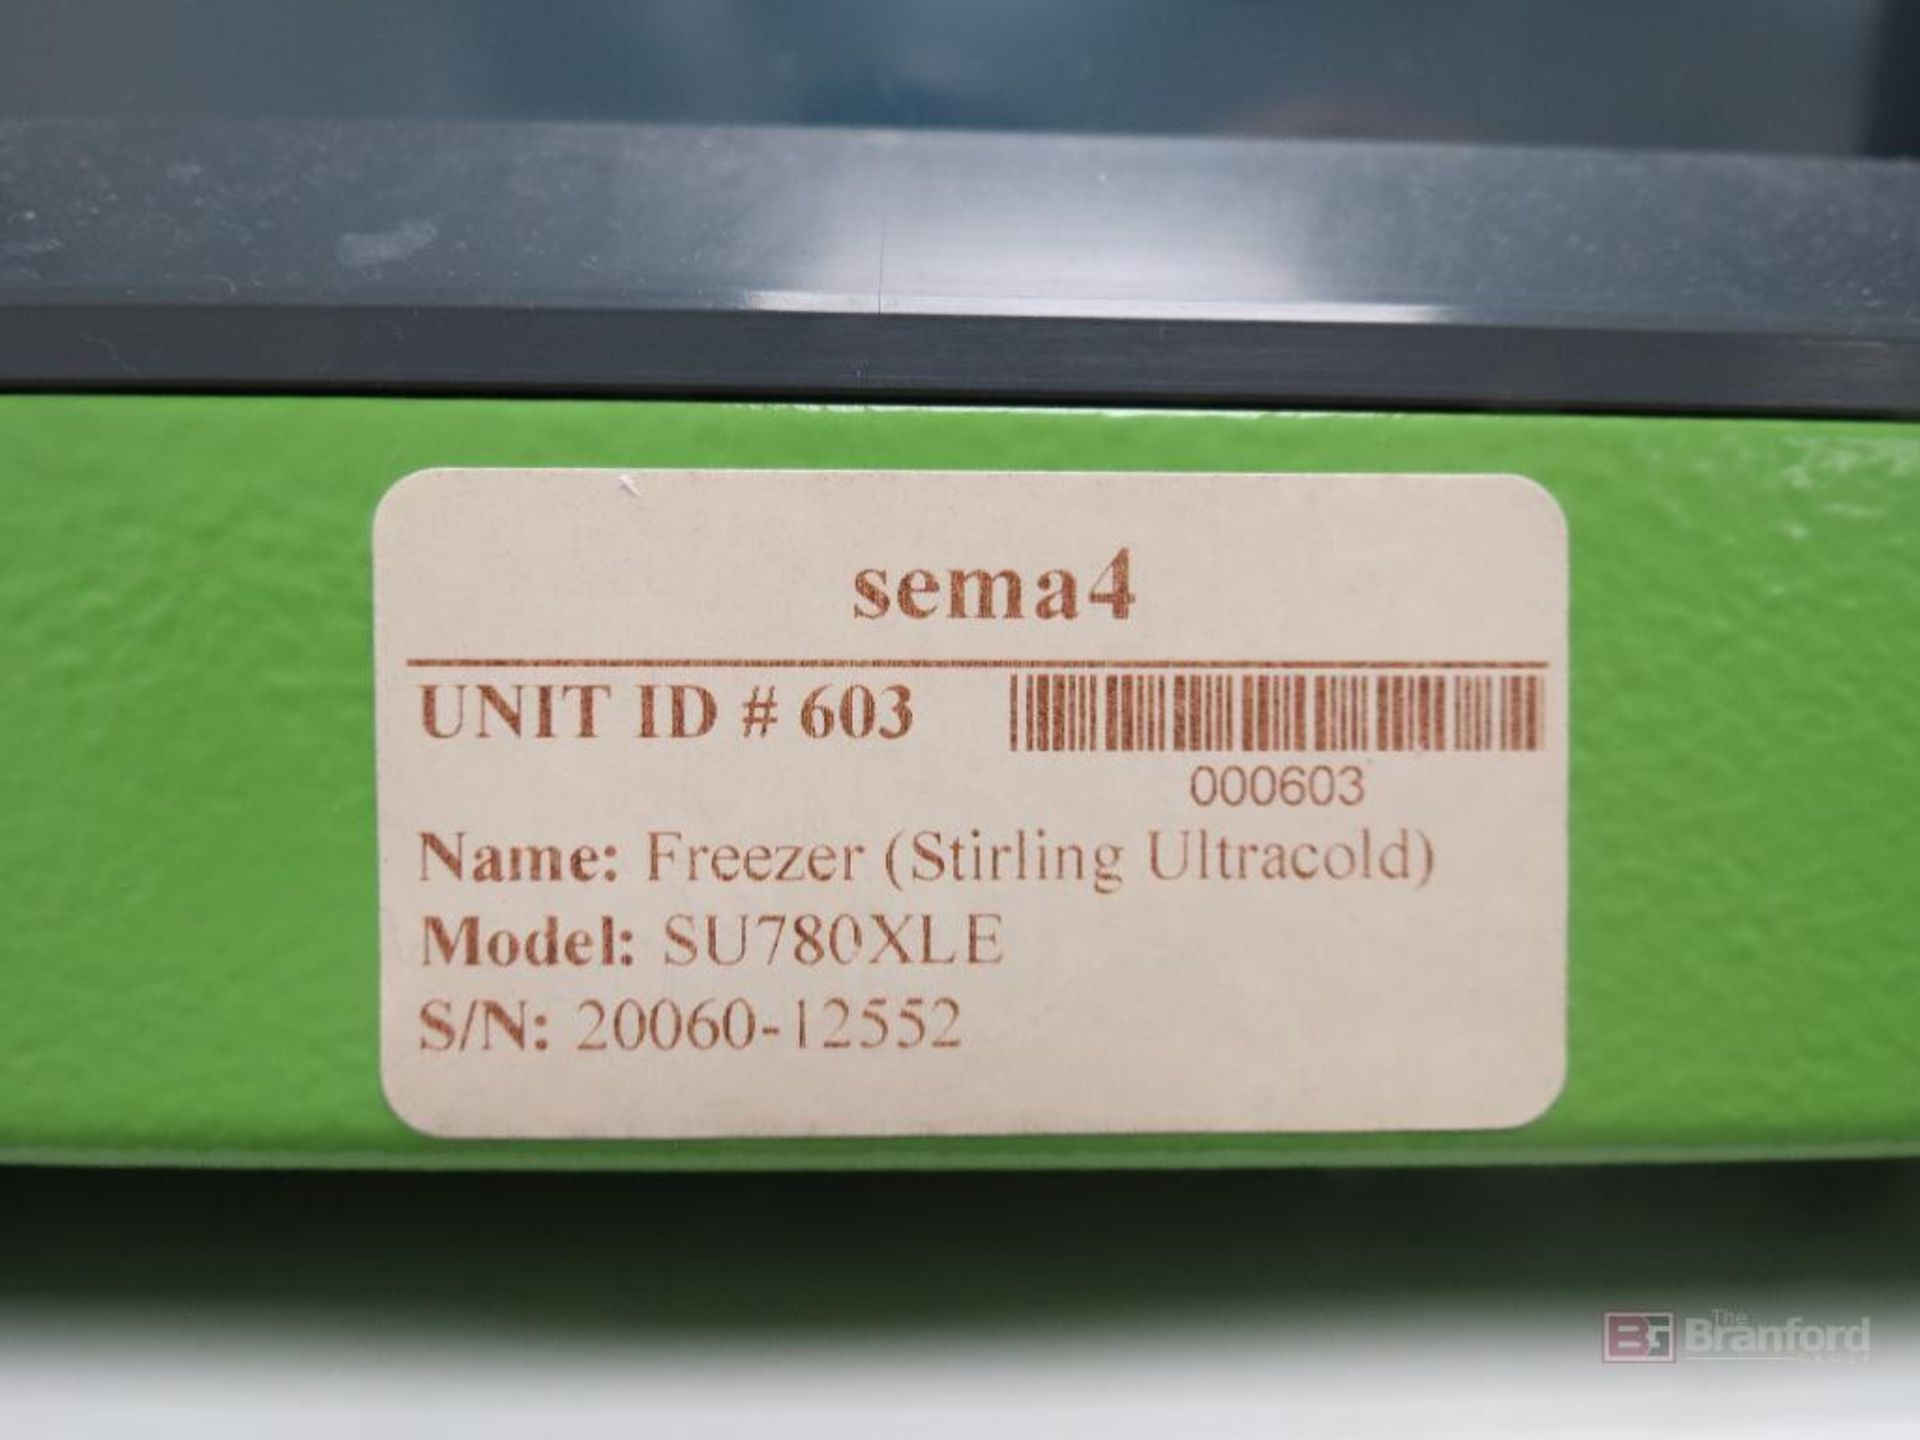 Stirling SU780XLE Ultracold -86°C Ultra Low Freezer - Image 2 of 4